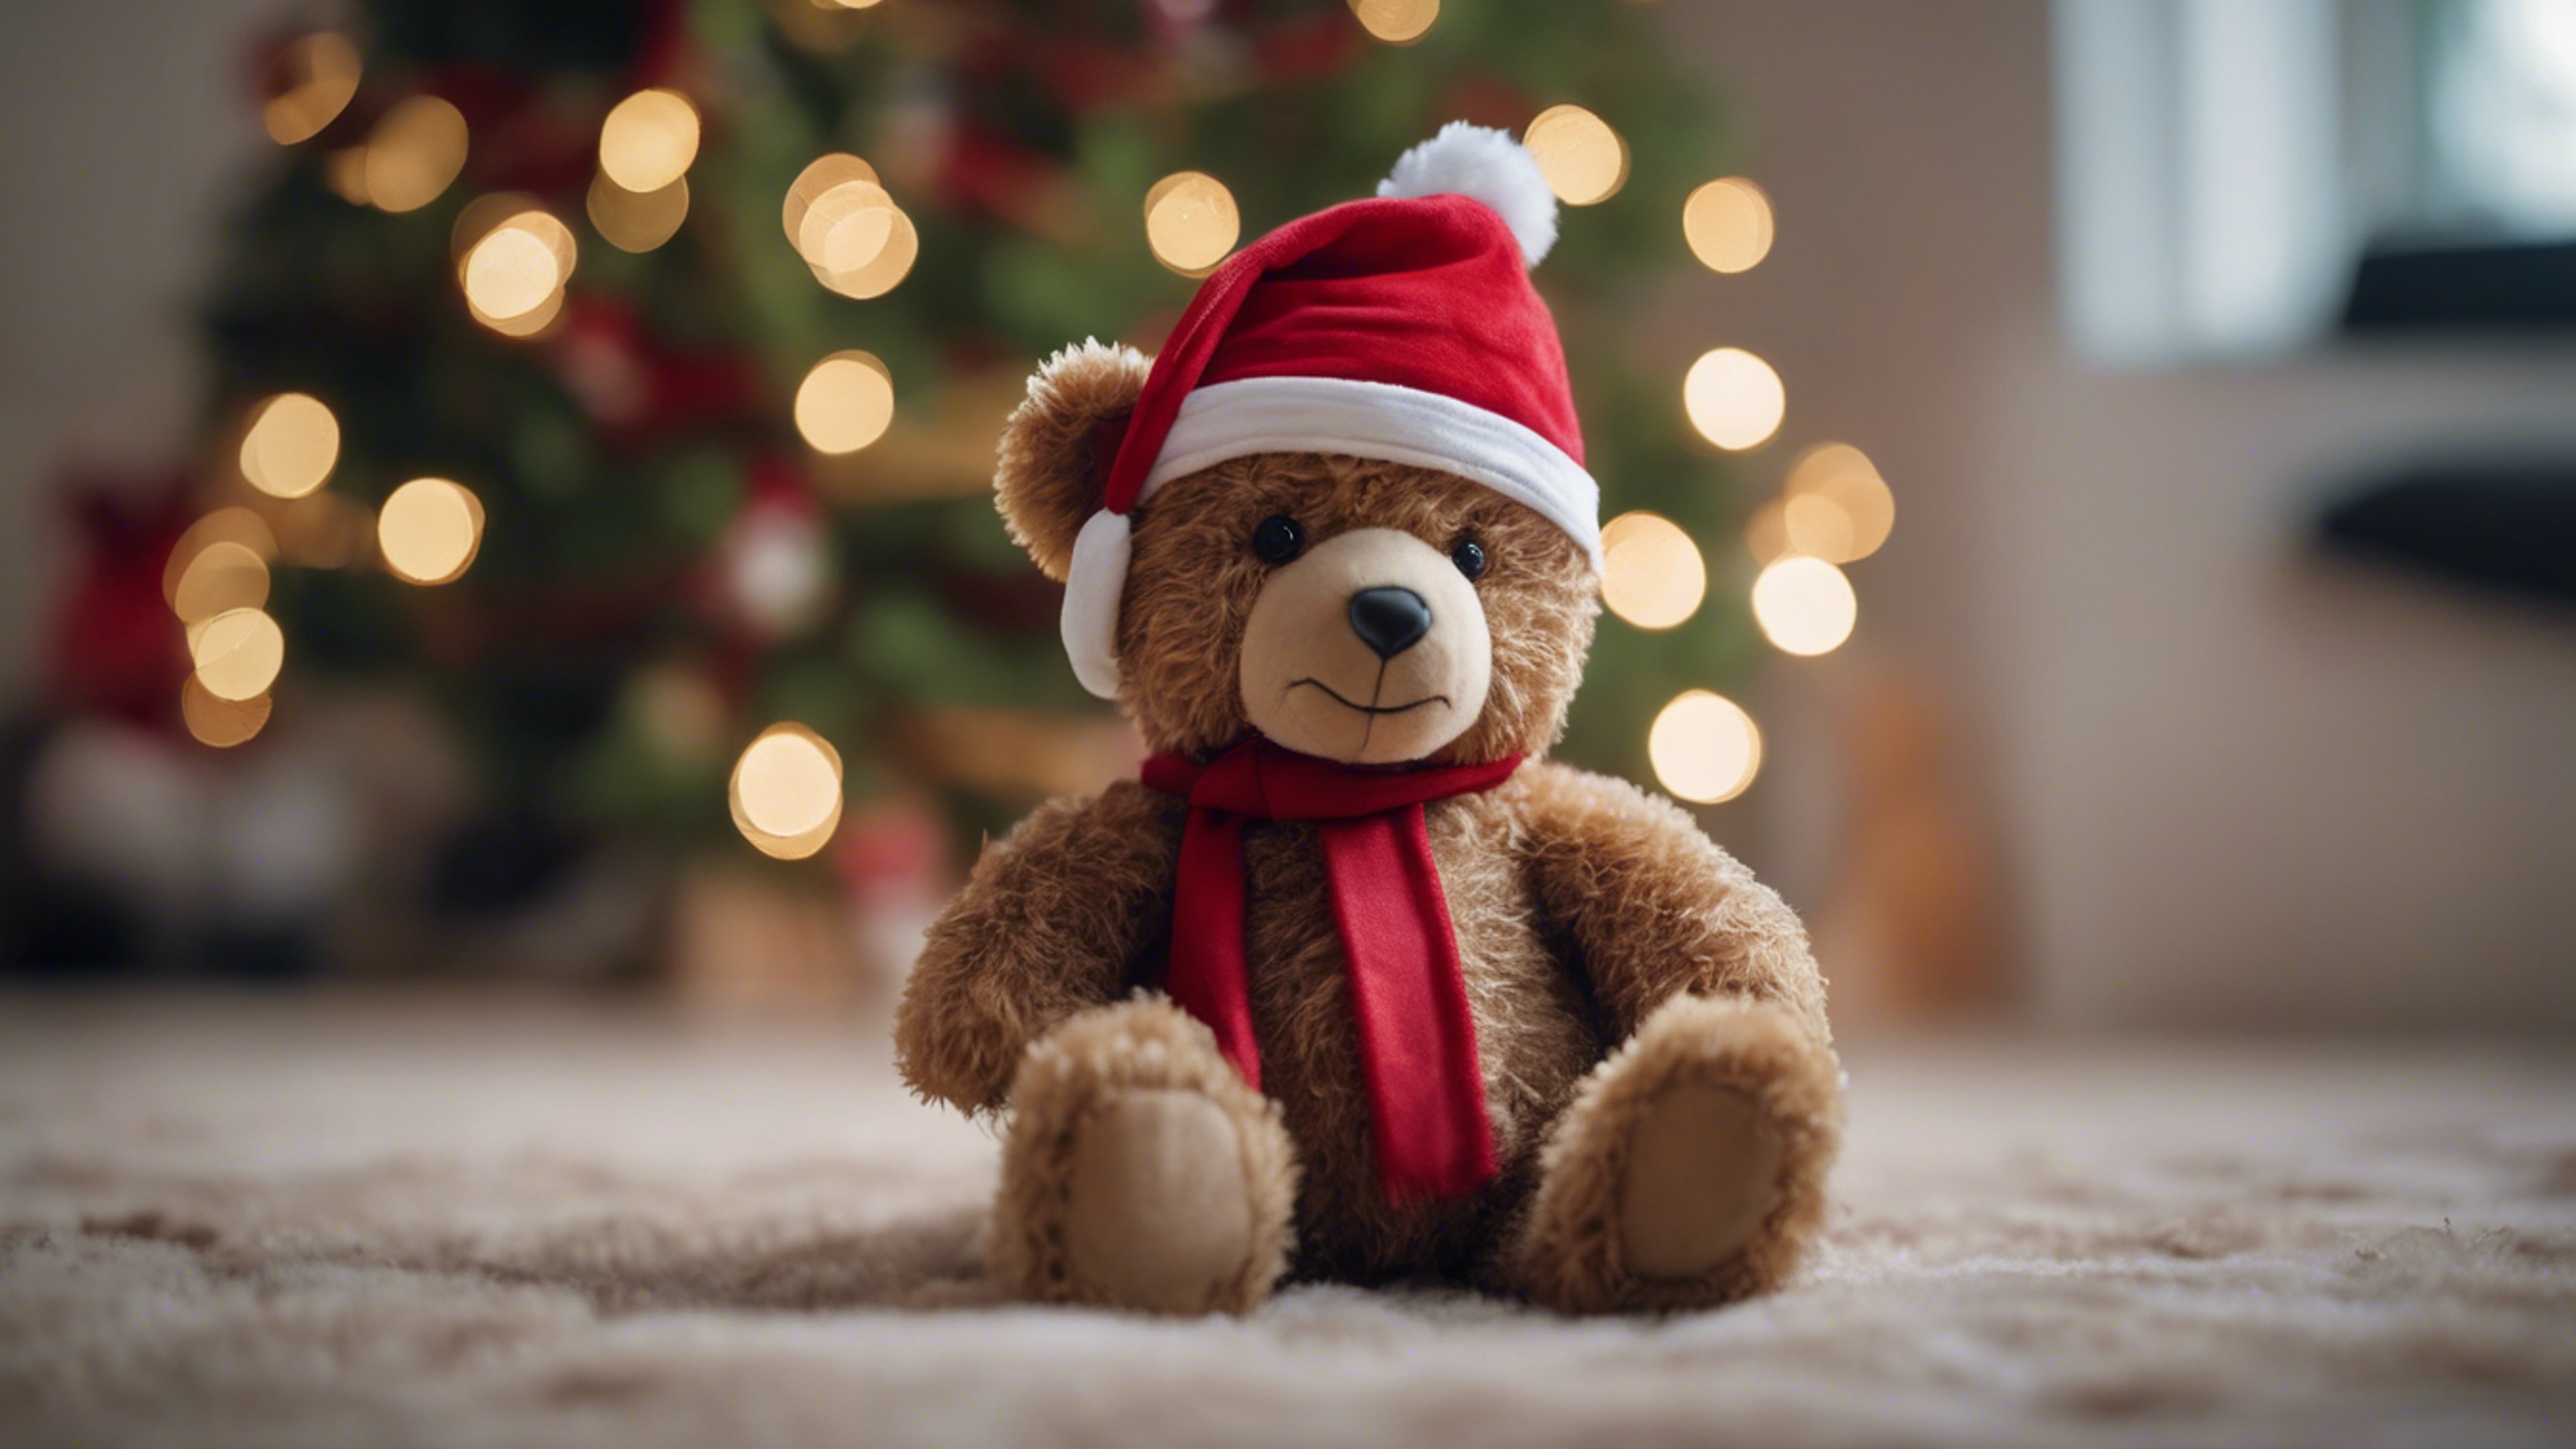 A teddy bear wearing a red Christmas hat, sitting next to a Christmas tree. Валлпапер[764052ee6d604b67a698]